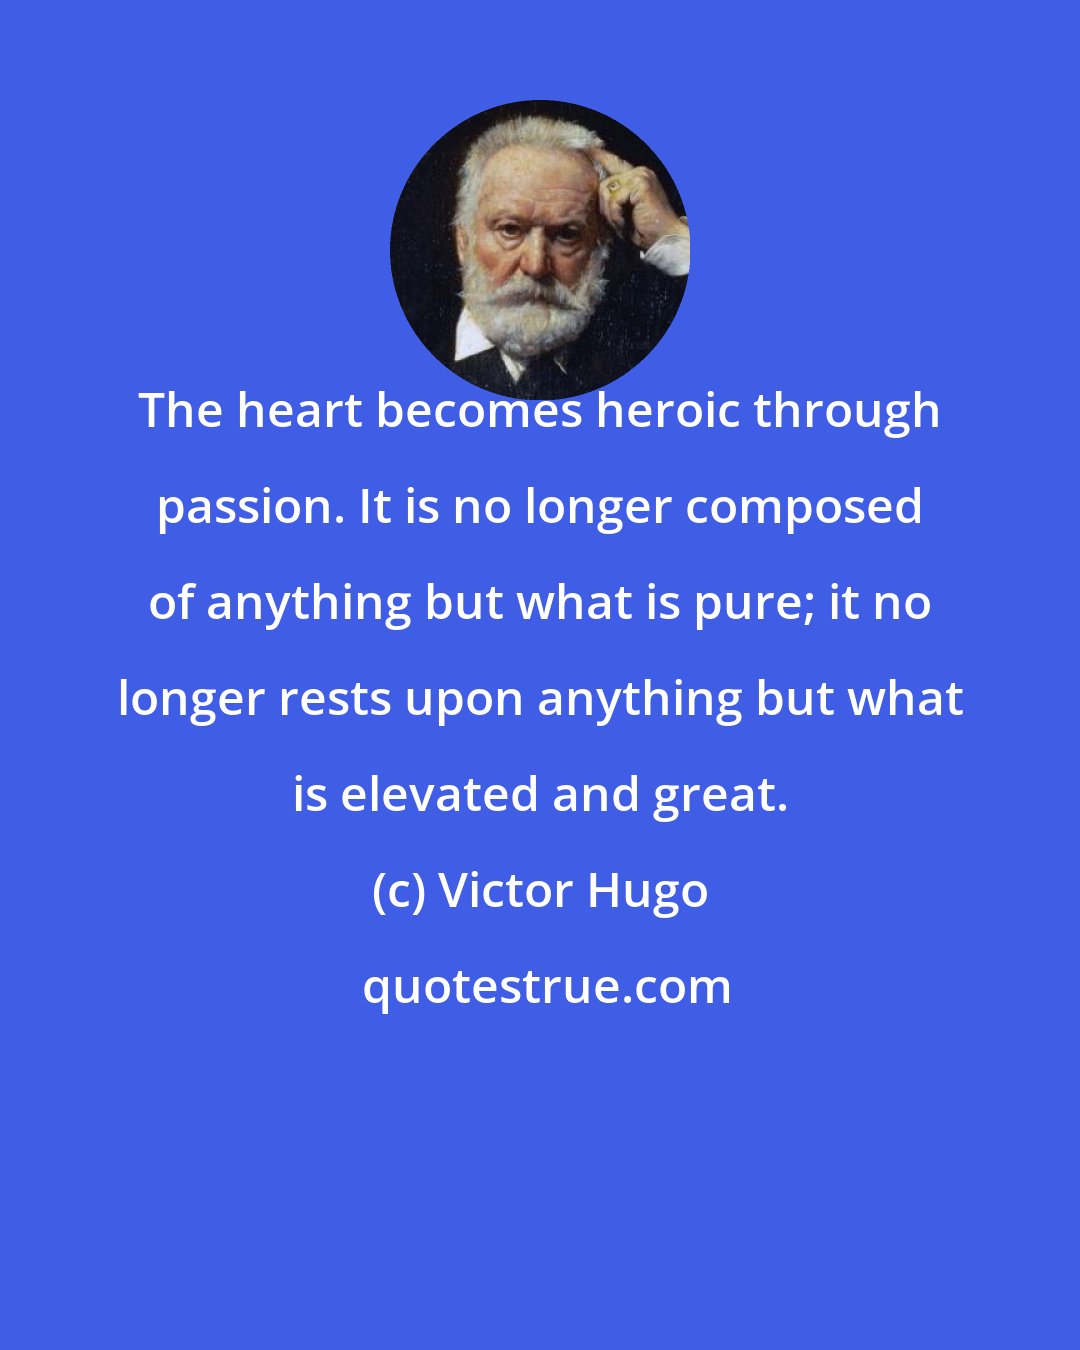 Victor Hugo: The heart becomes heroic through passion. It is no longer composed of anything but what is pure; it no longer rests upon anything but what is elevated and great.